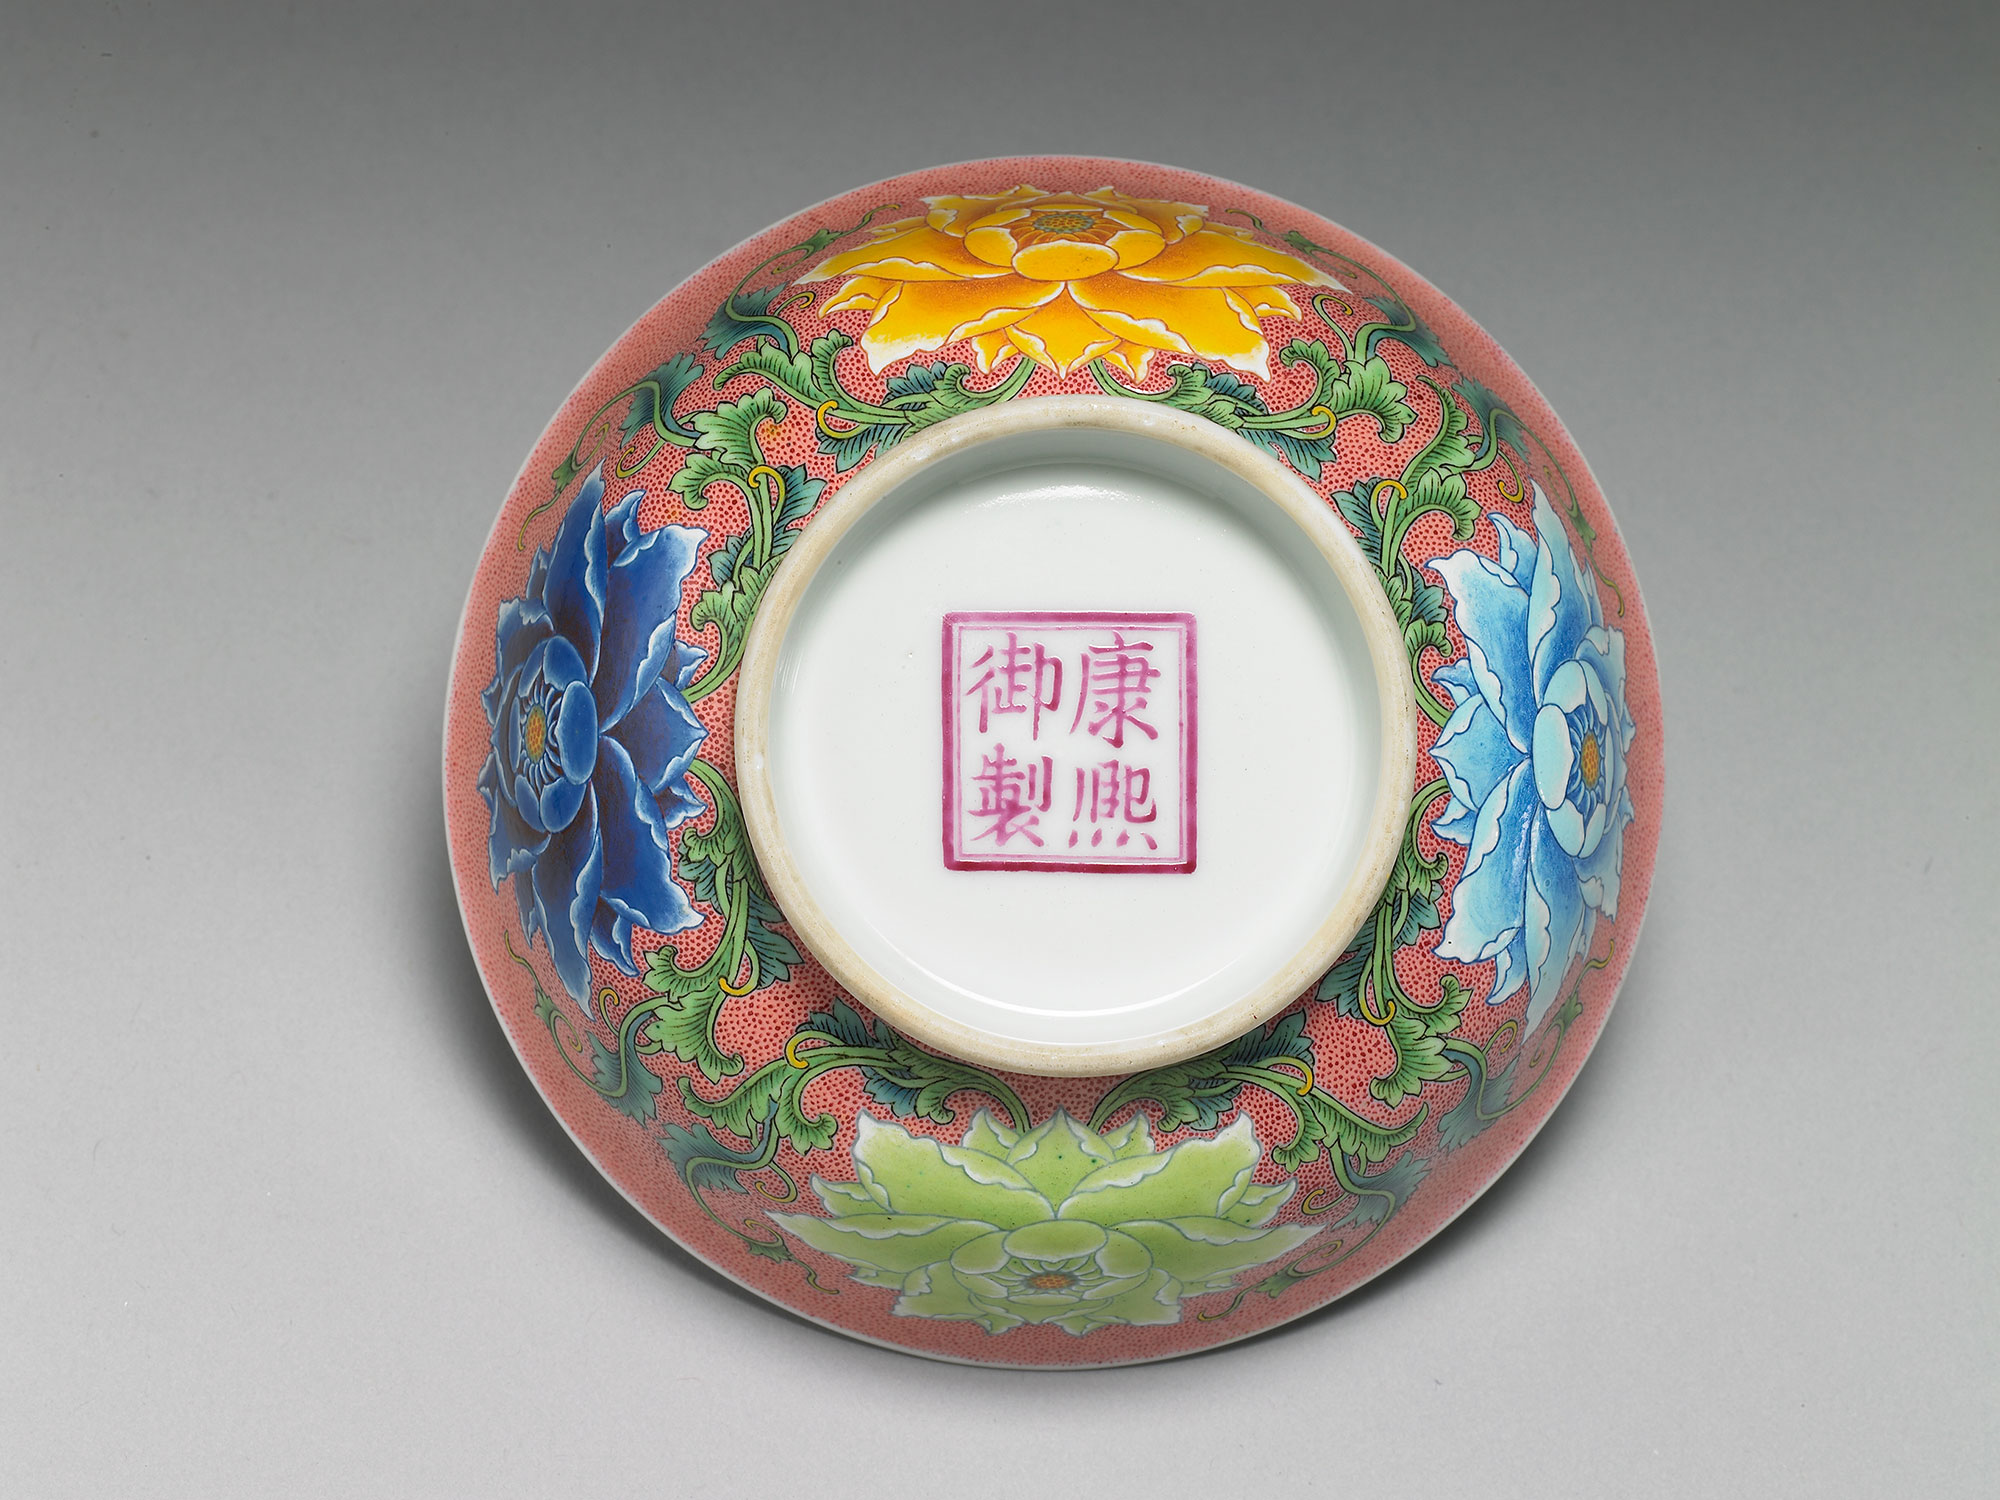 Bowl with Indian lotuses on a pink ground in painted enamels